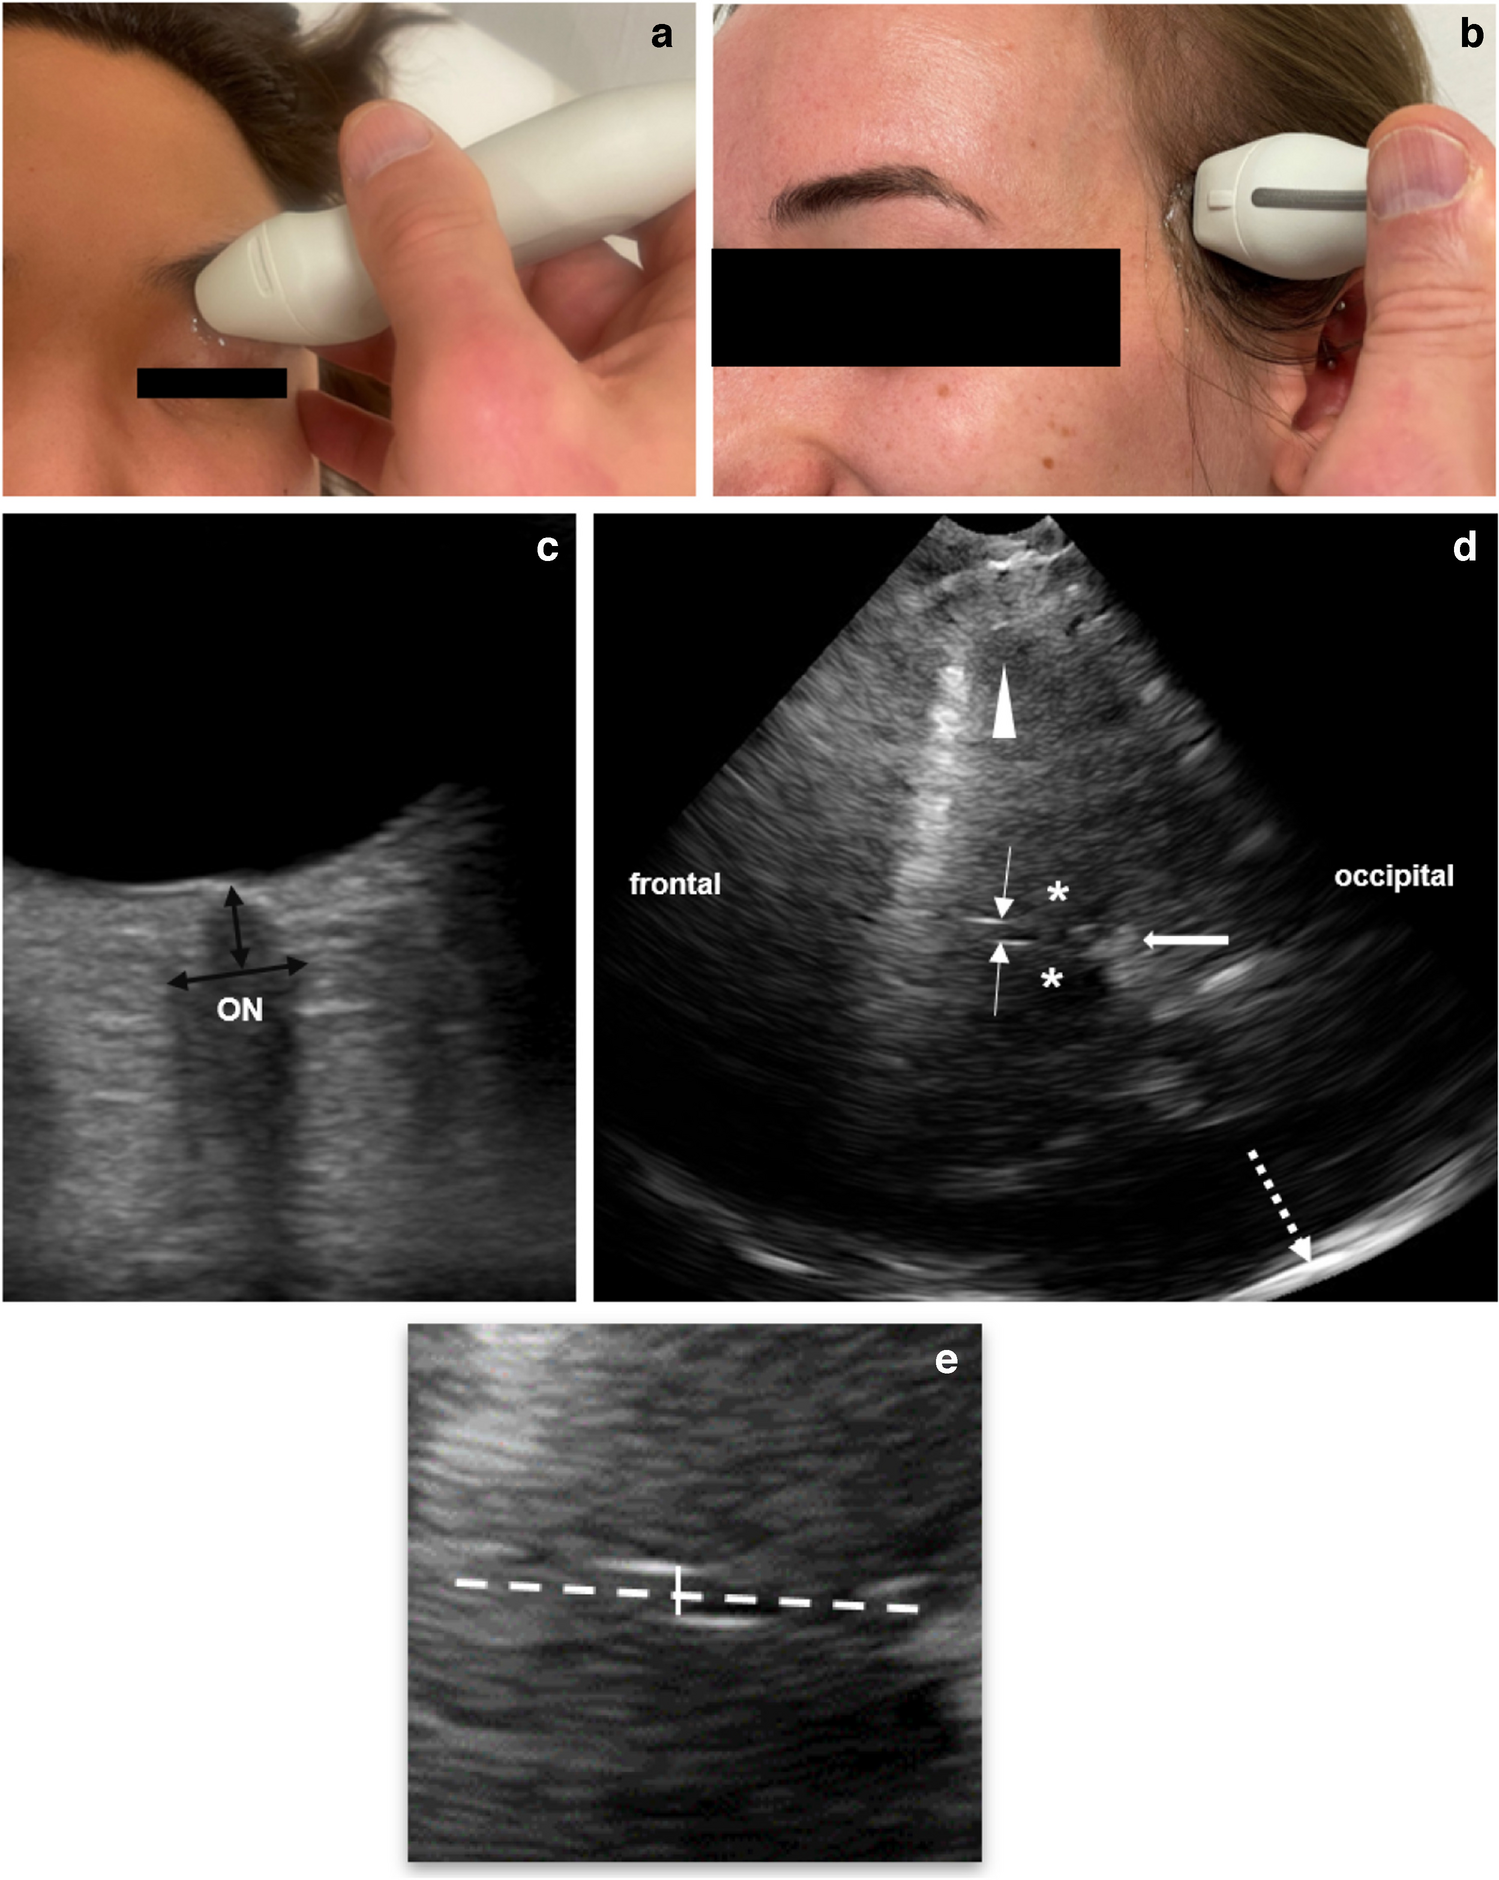 Ultrasound-guided initial diagnosis and follow-up of pediatric idiopathic intracranial hypertension